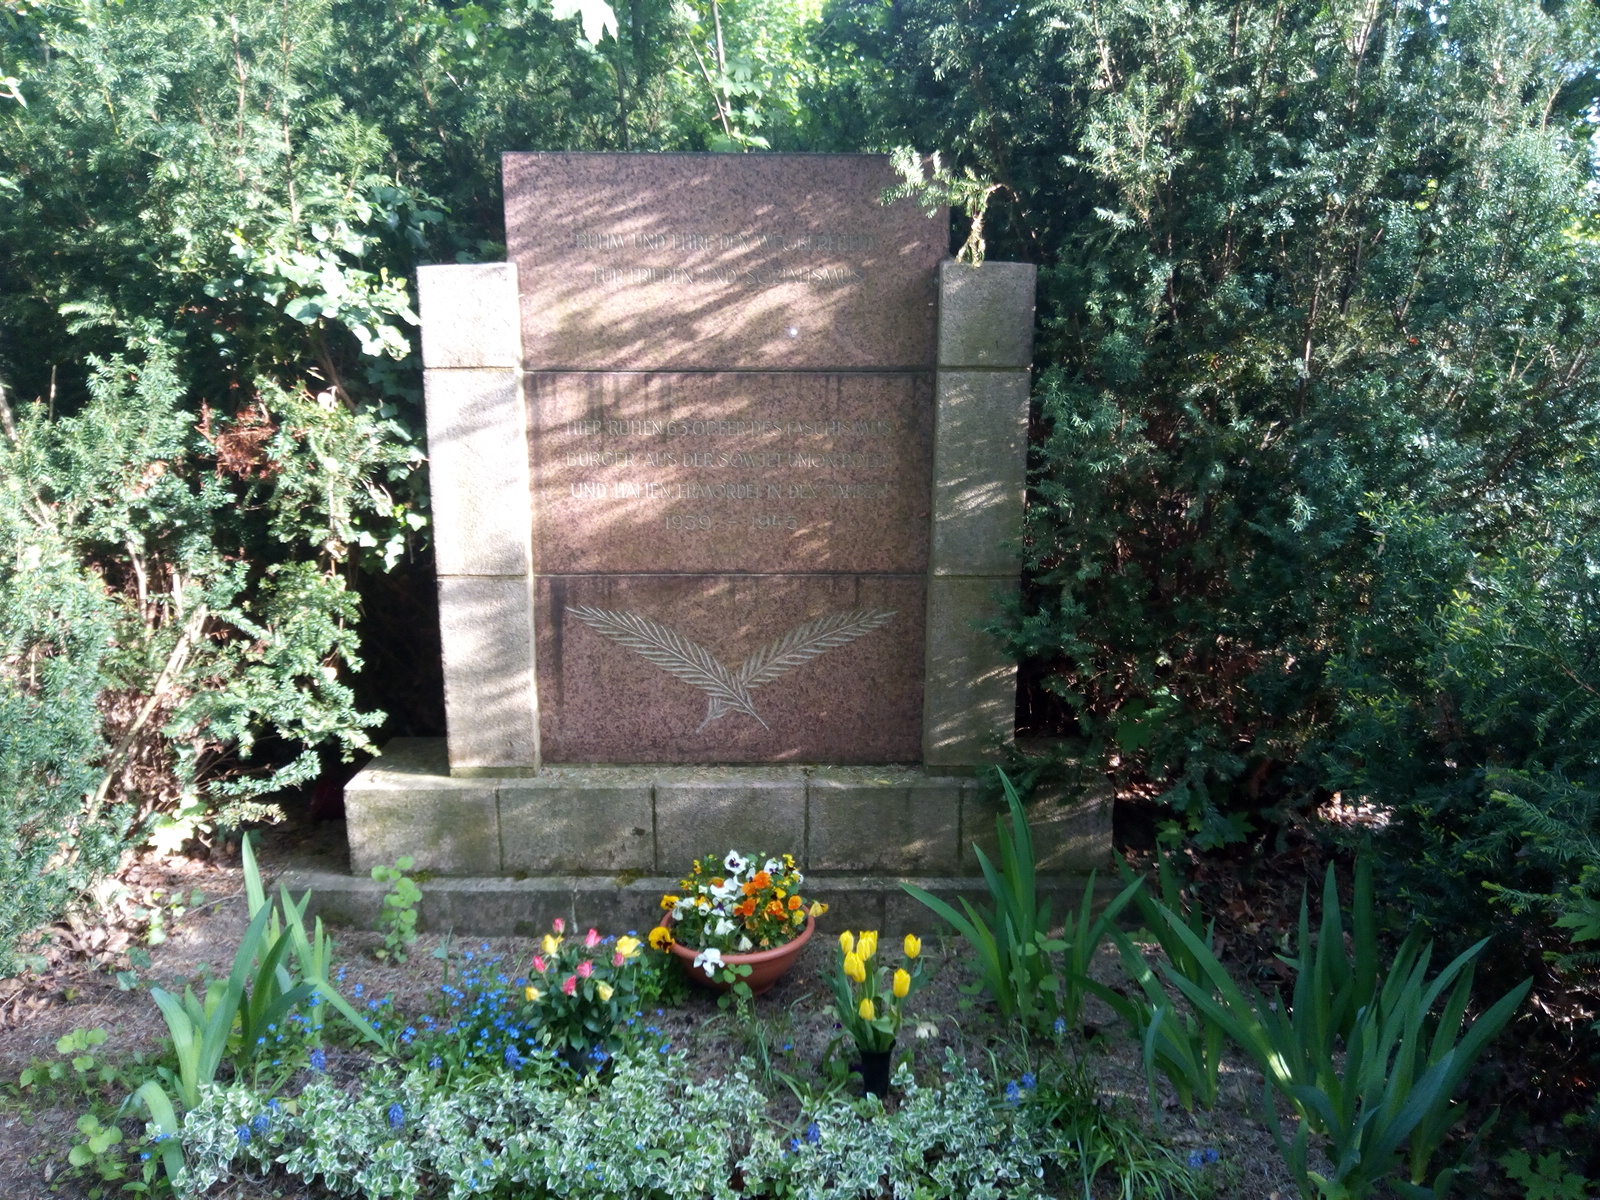 Memorial stone for the victims of forced labour in Meißen